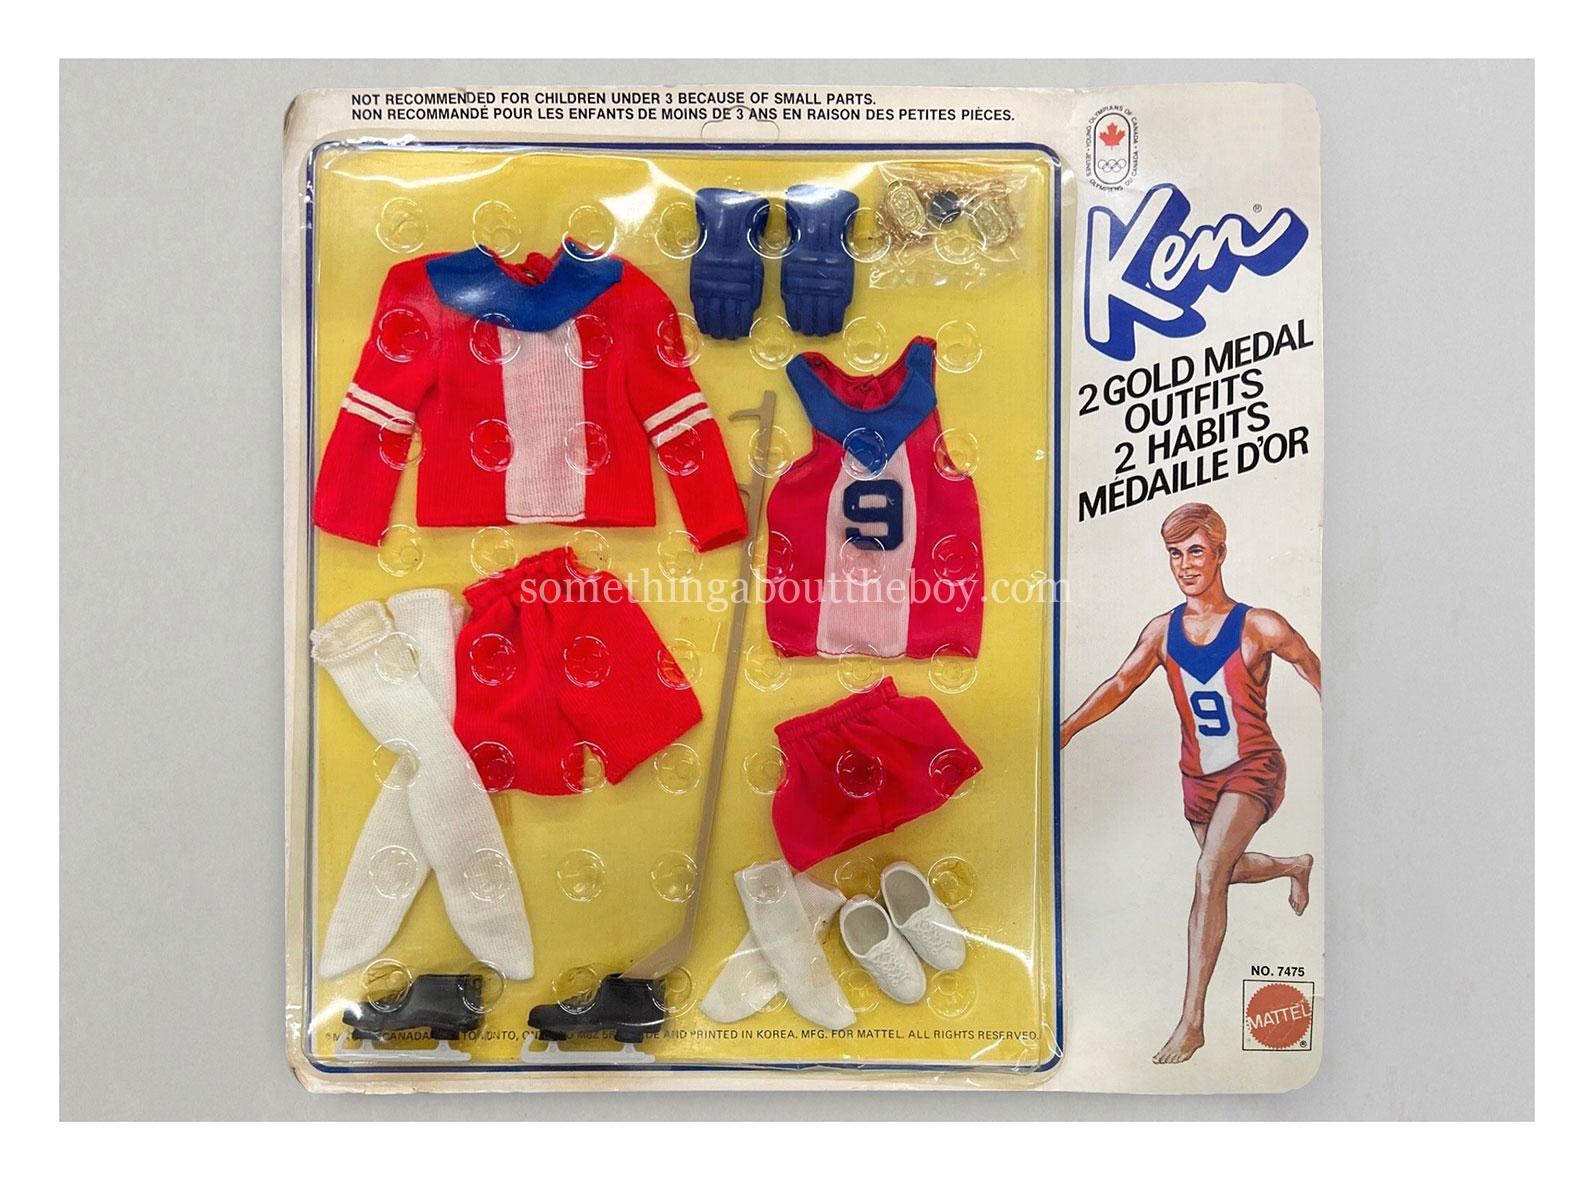 1975 2 Gold Medal Outfits in original packaging